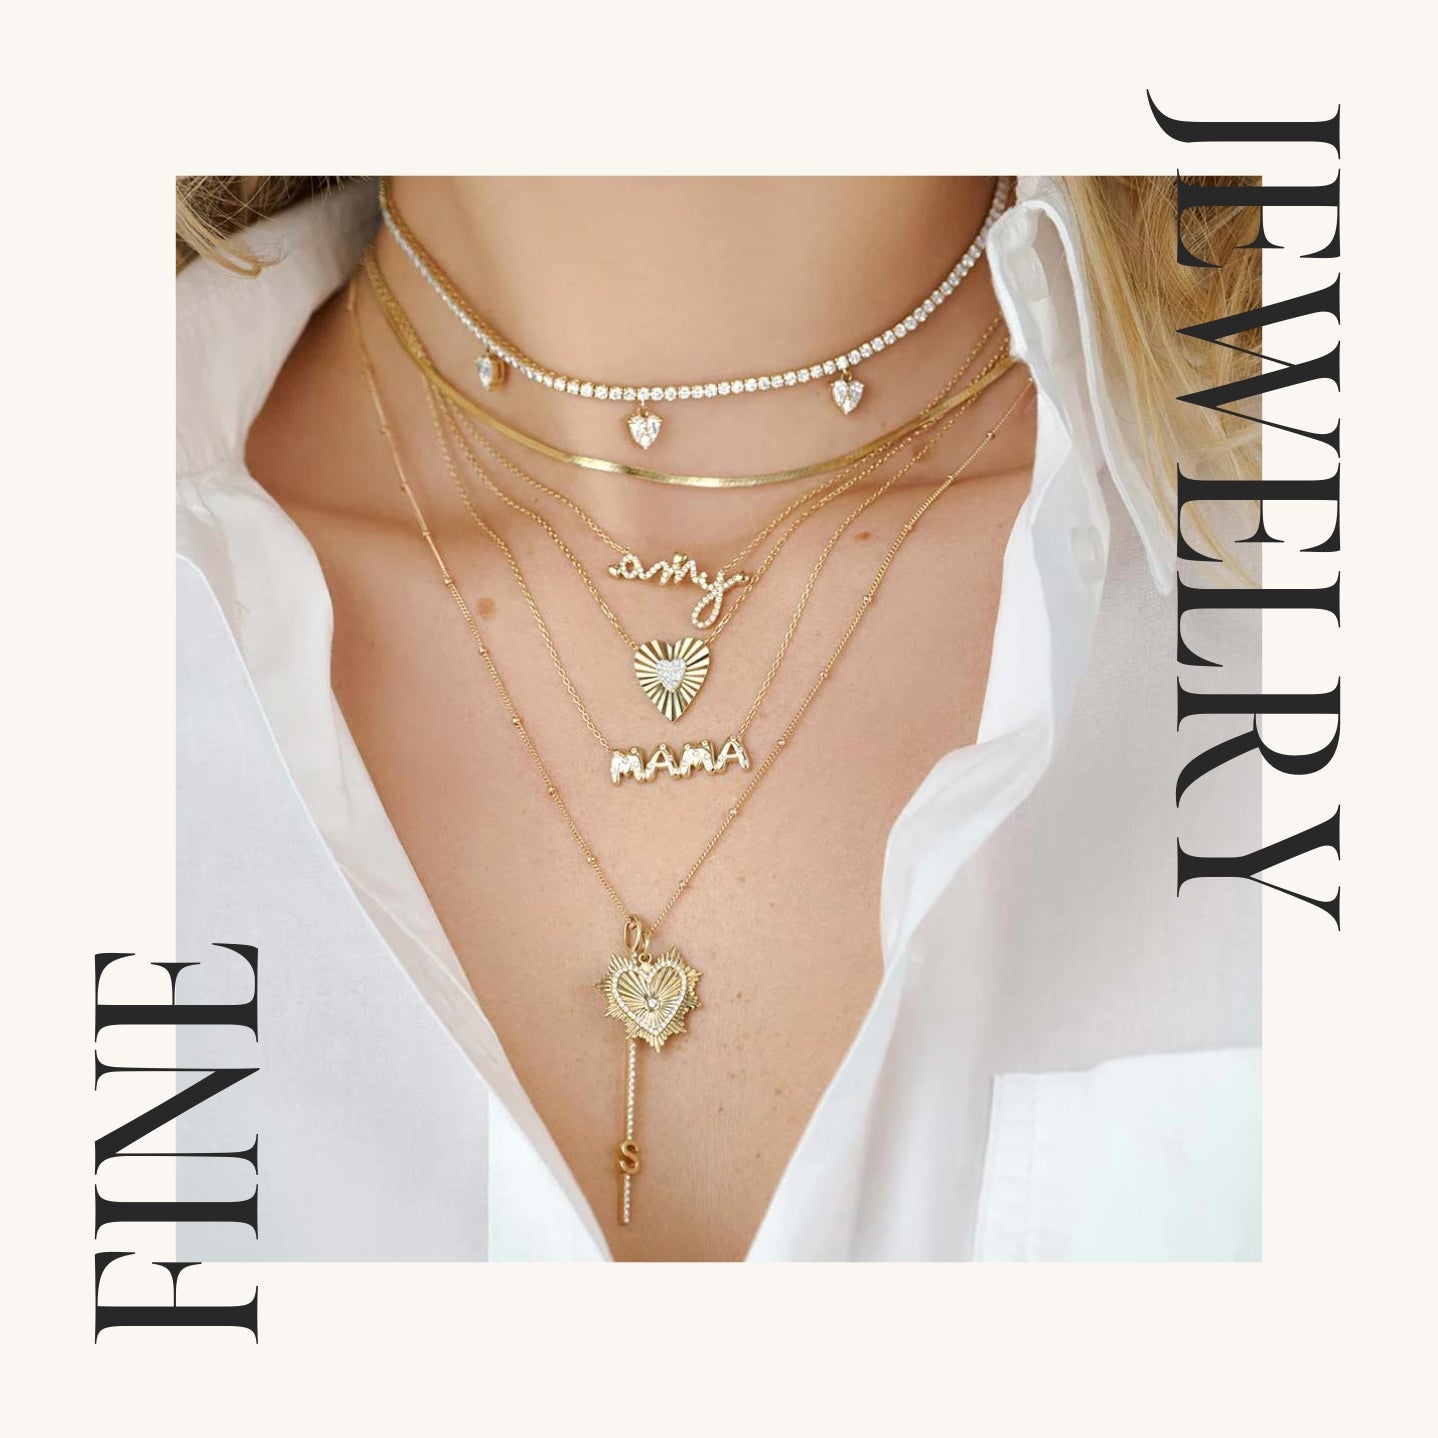 4 Fine Jewelry Brands with Timeless Pieces You'll Love